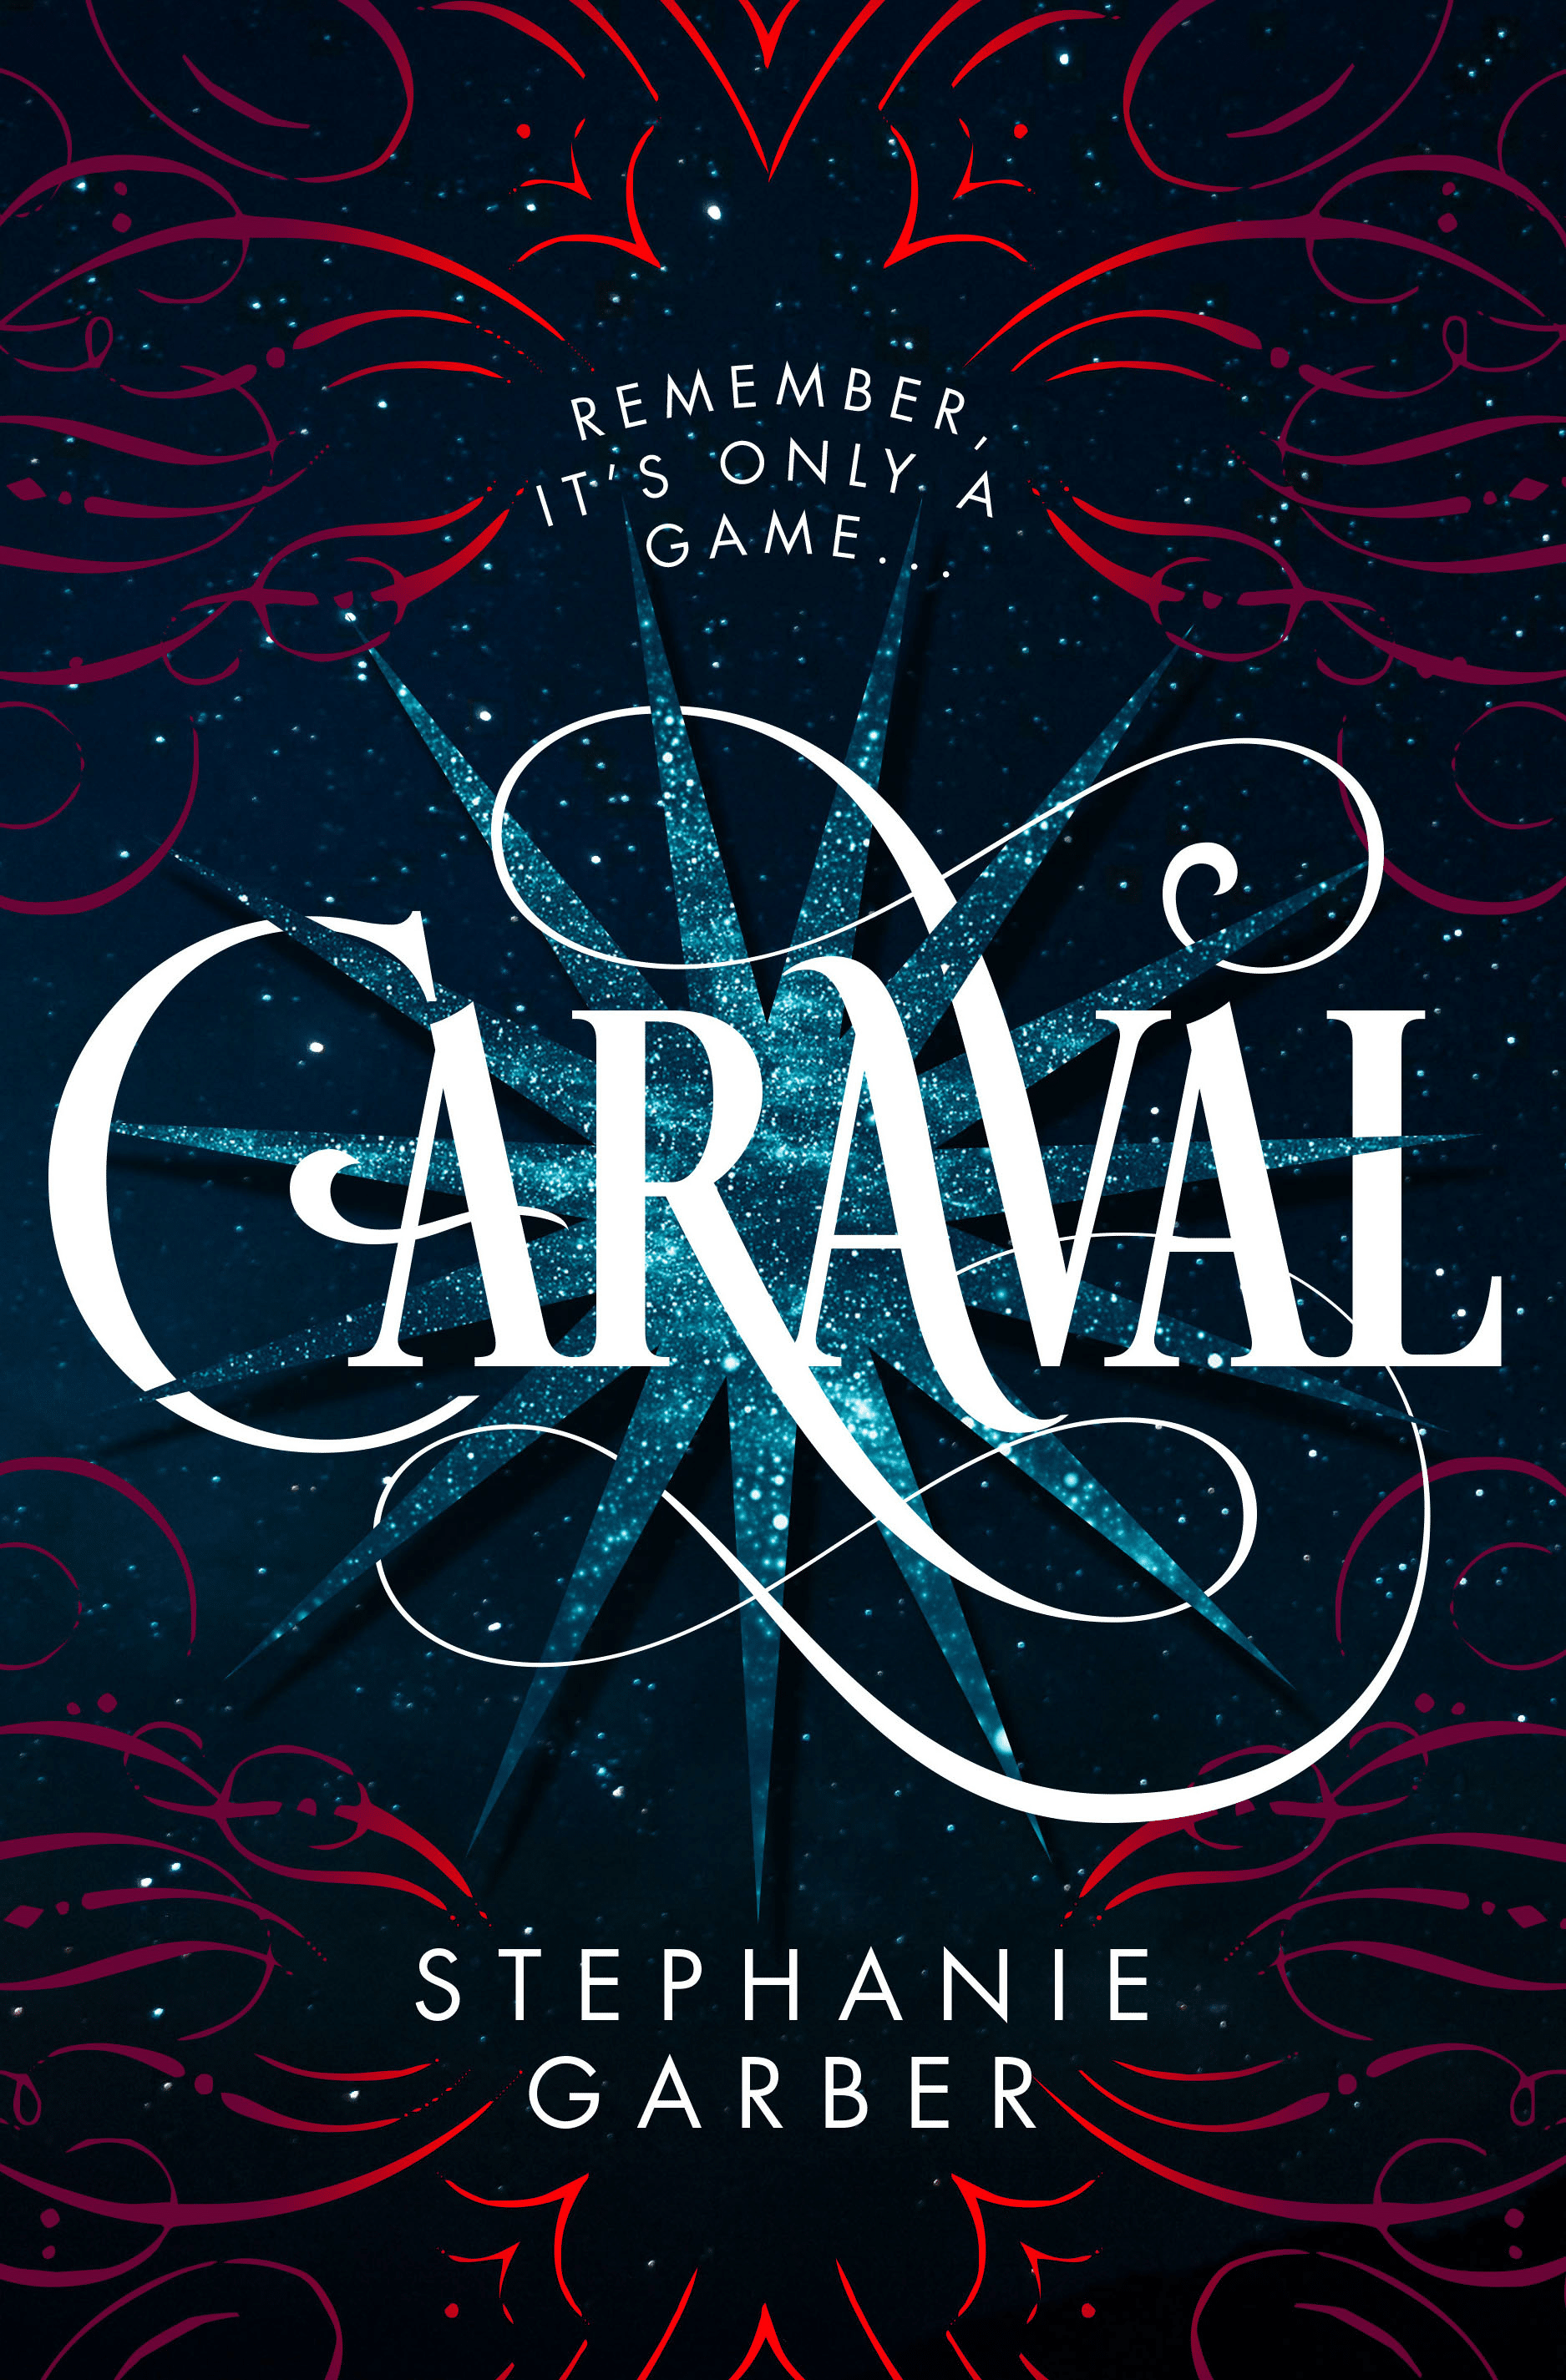 Caraval by Stephanie Garber from Goodreads.com